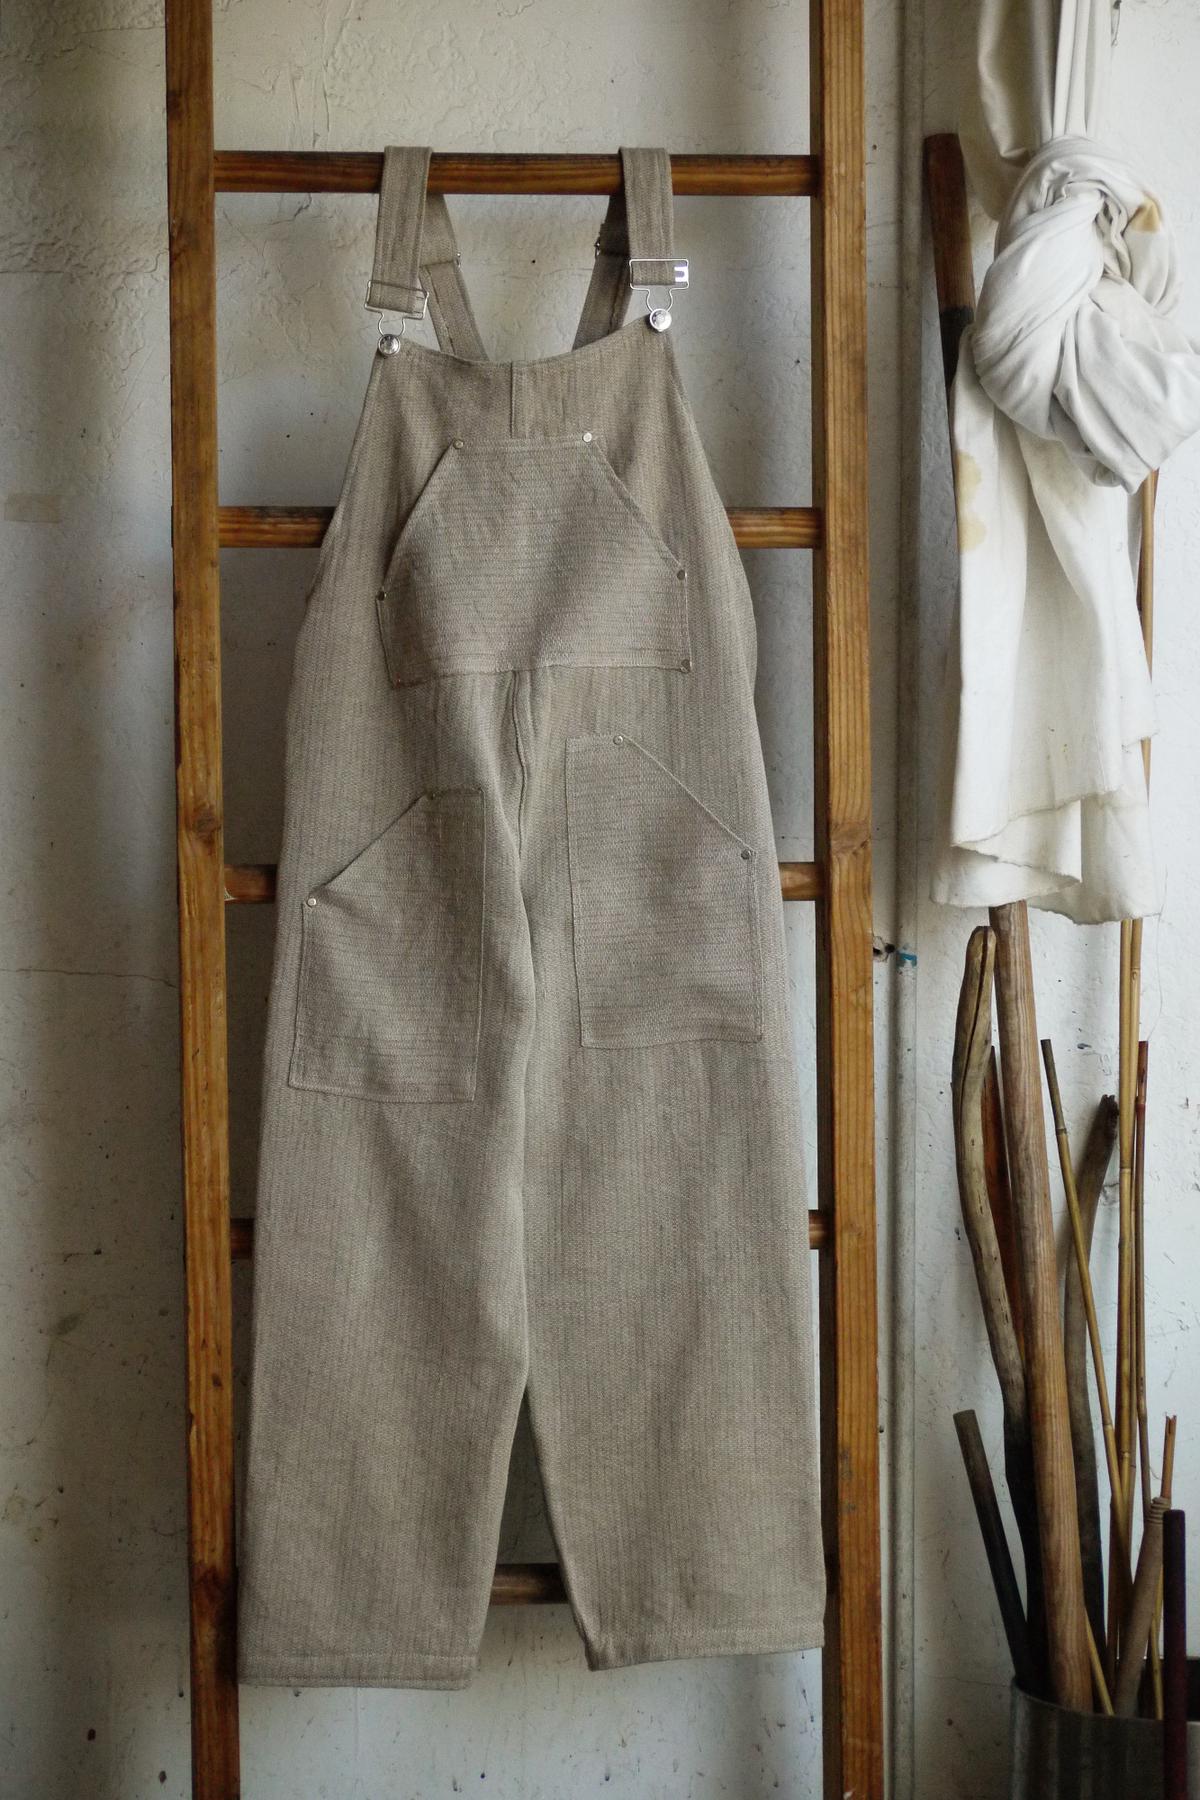 a pair of tan overalls hanging from a wooden ladder. it has boxy dimensions, silver buckles, and large angular pockets.